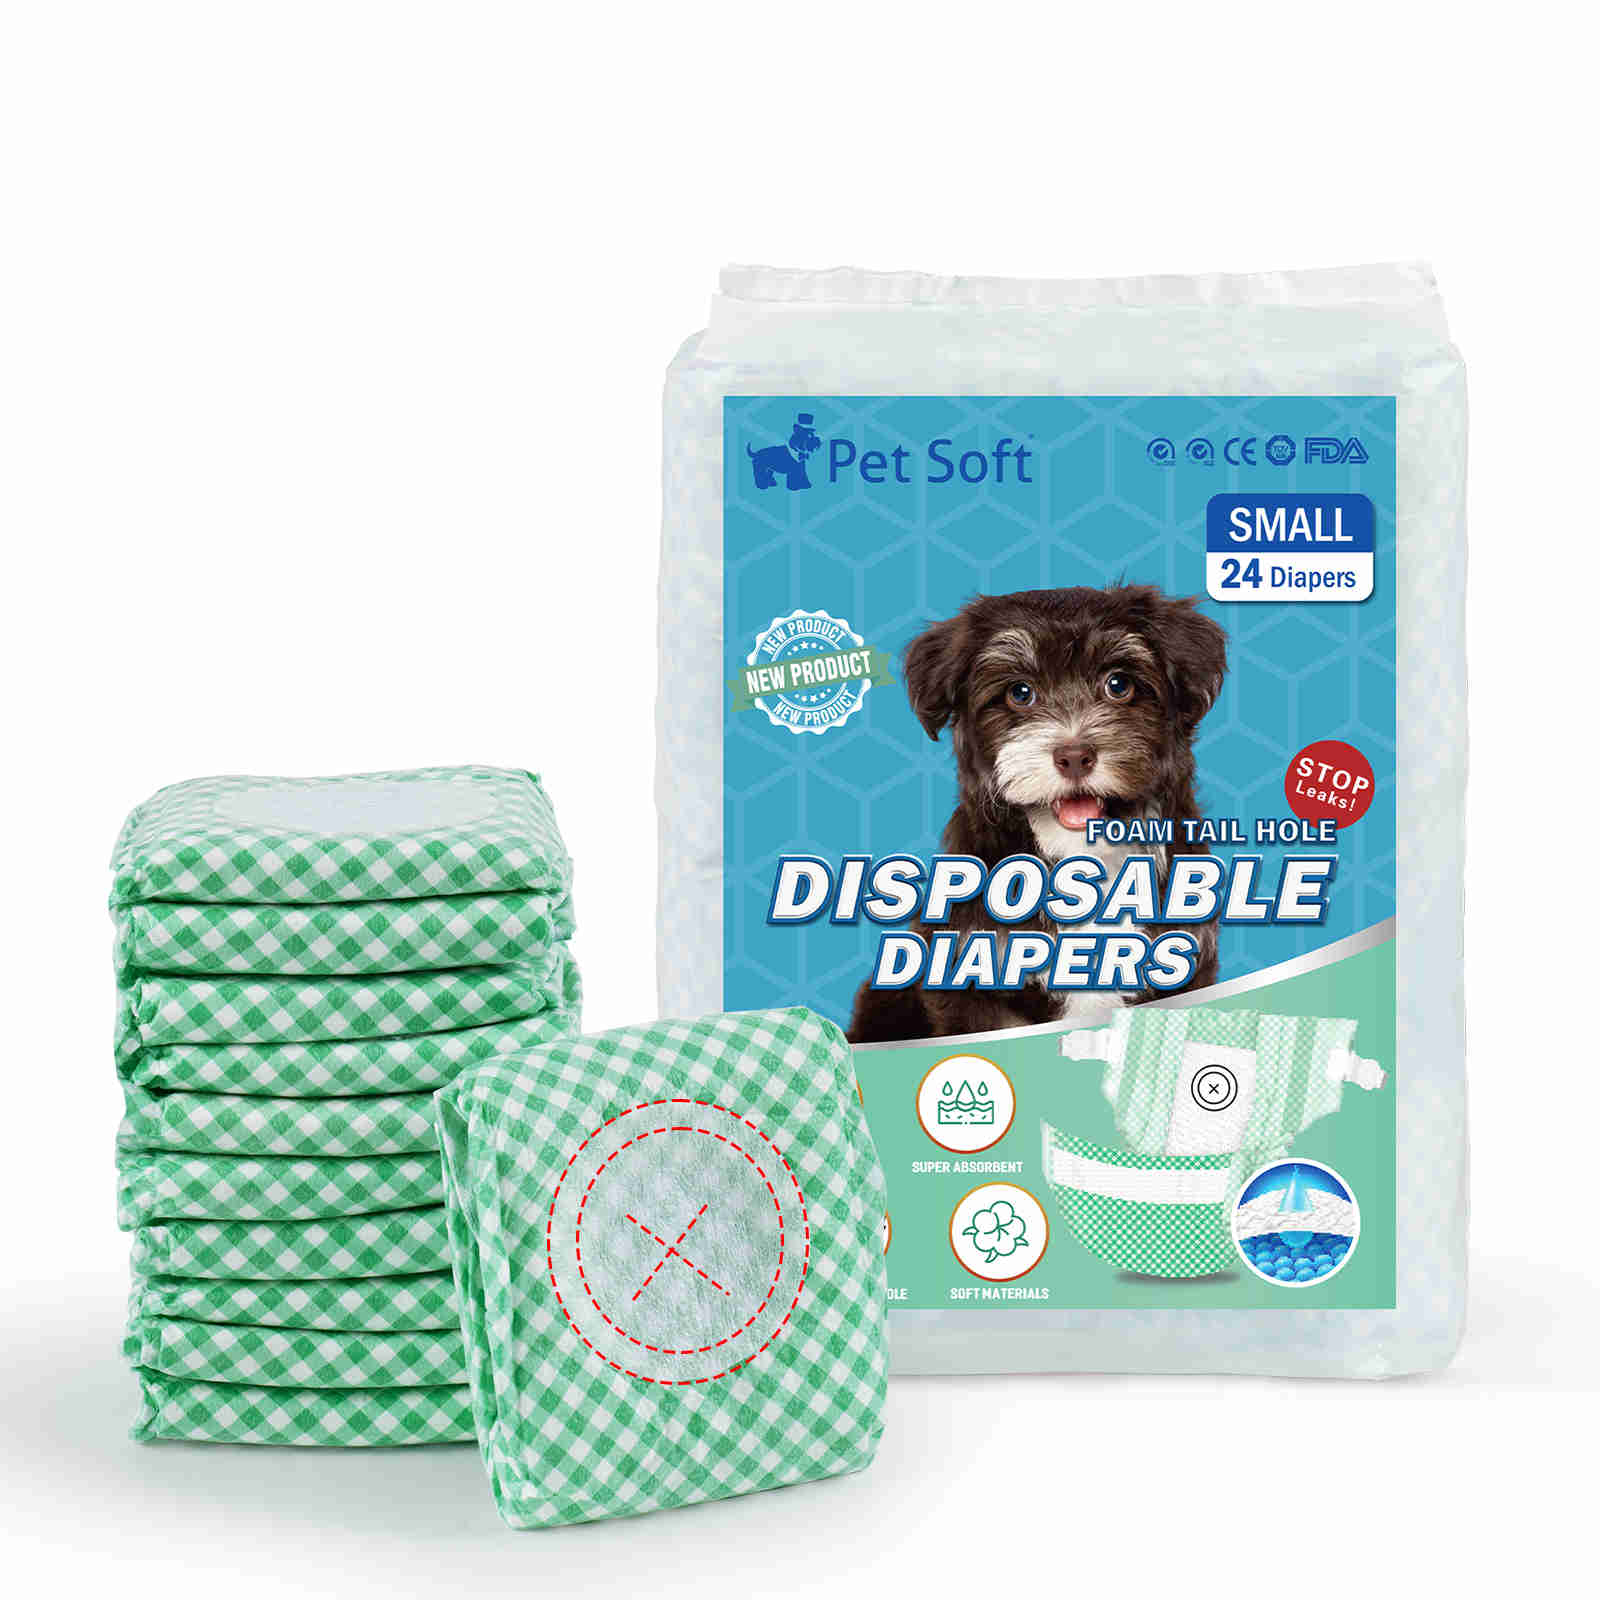 2 Pack Waterproof Dog Diapers Female Large Pet Washable